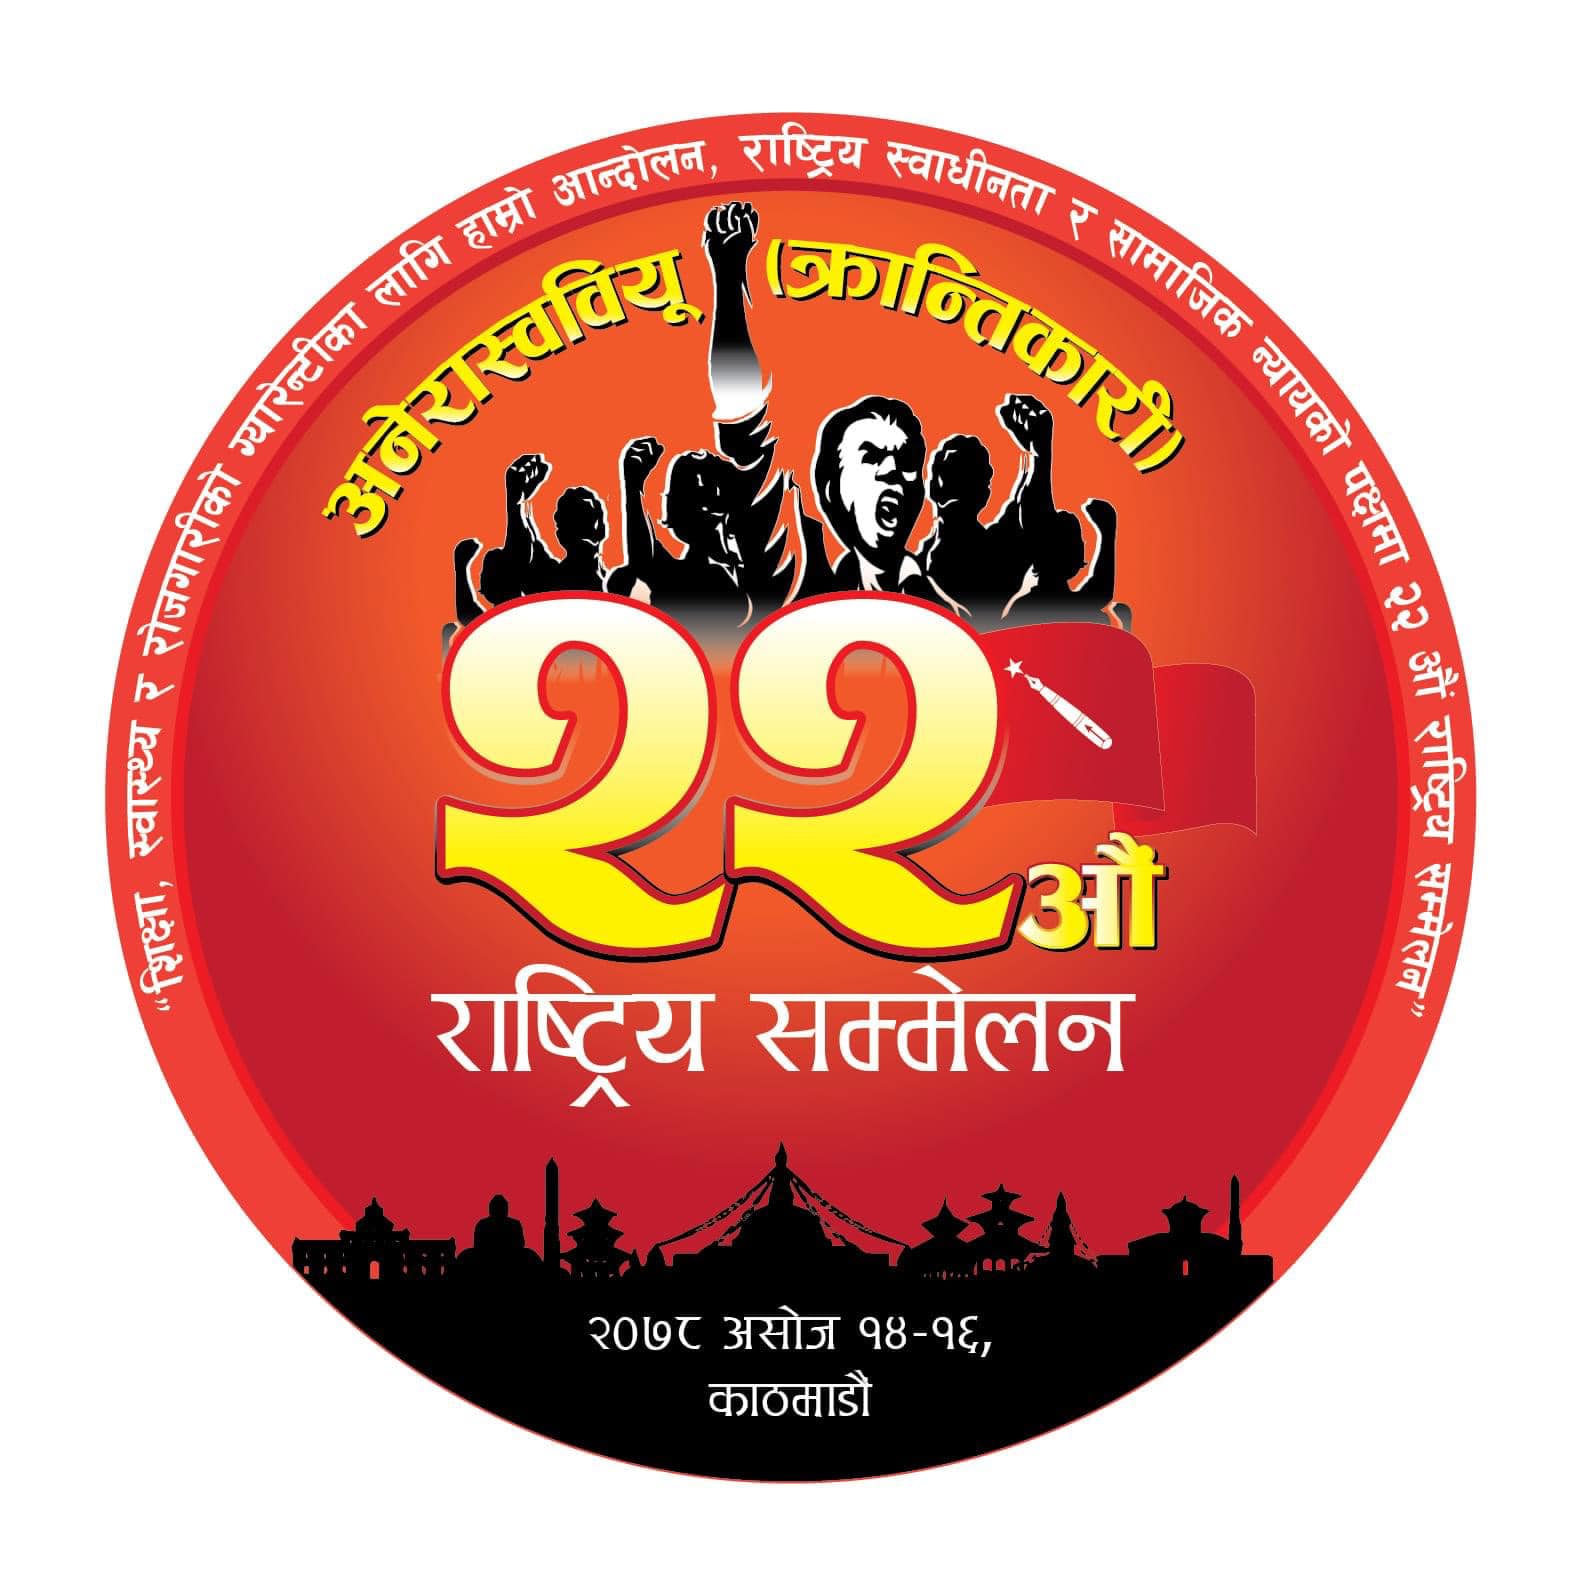 Prachanda will inaugurate the 22nd conference of Akhil (Revolutionary)